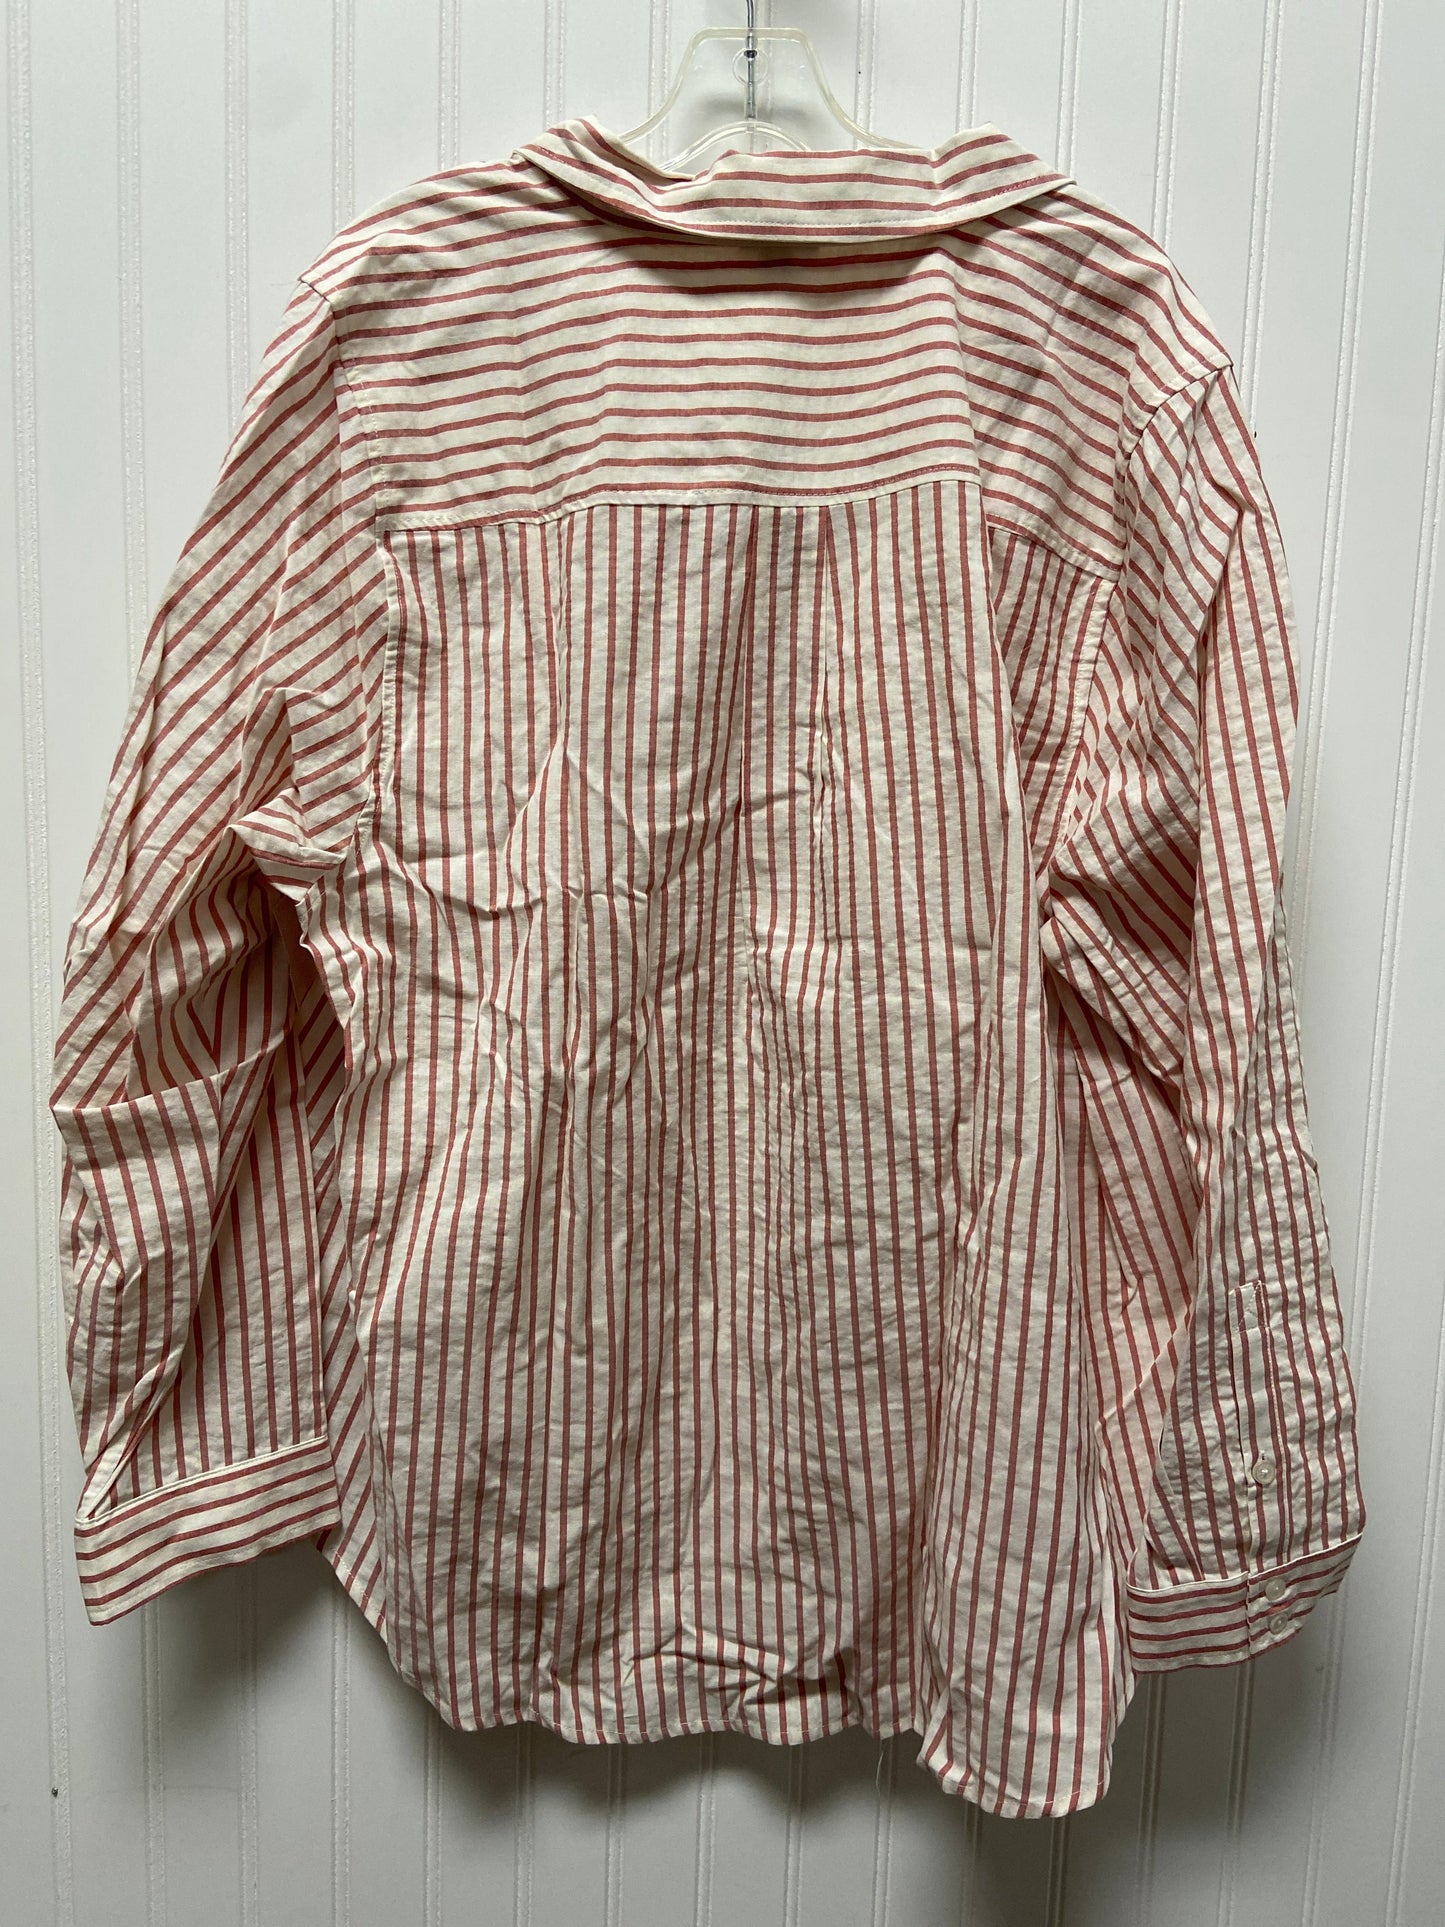 Red & White Top Long Sleeve Torrid, Size 3x